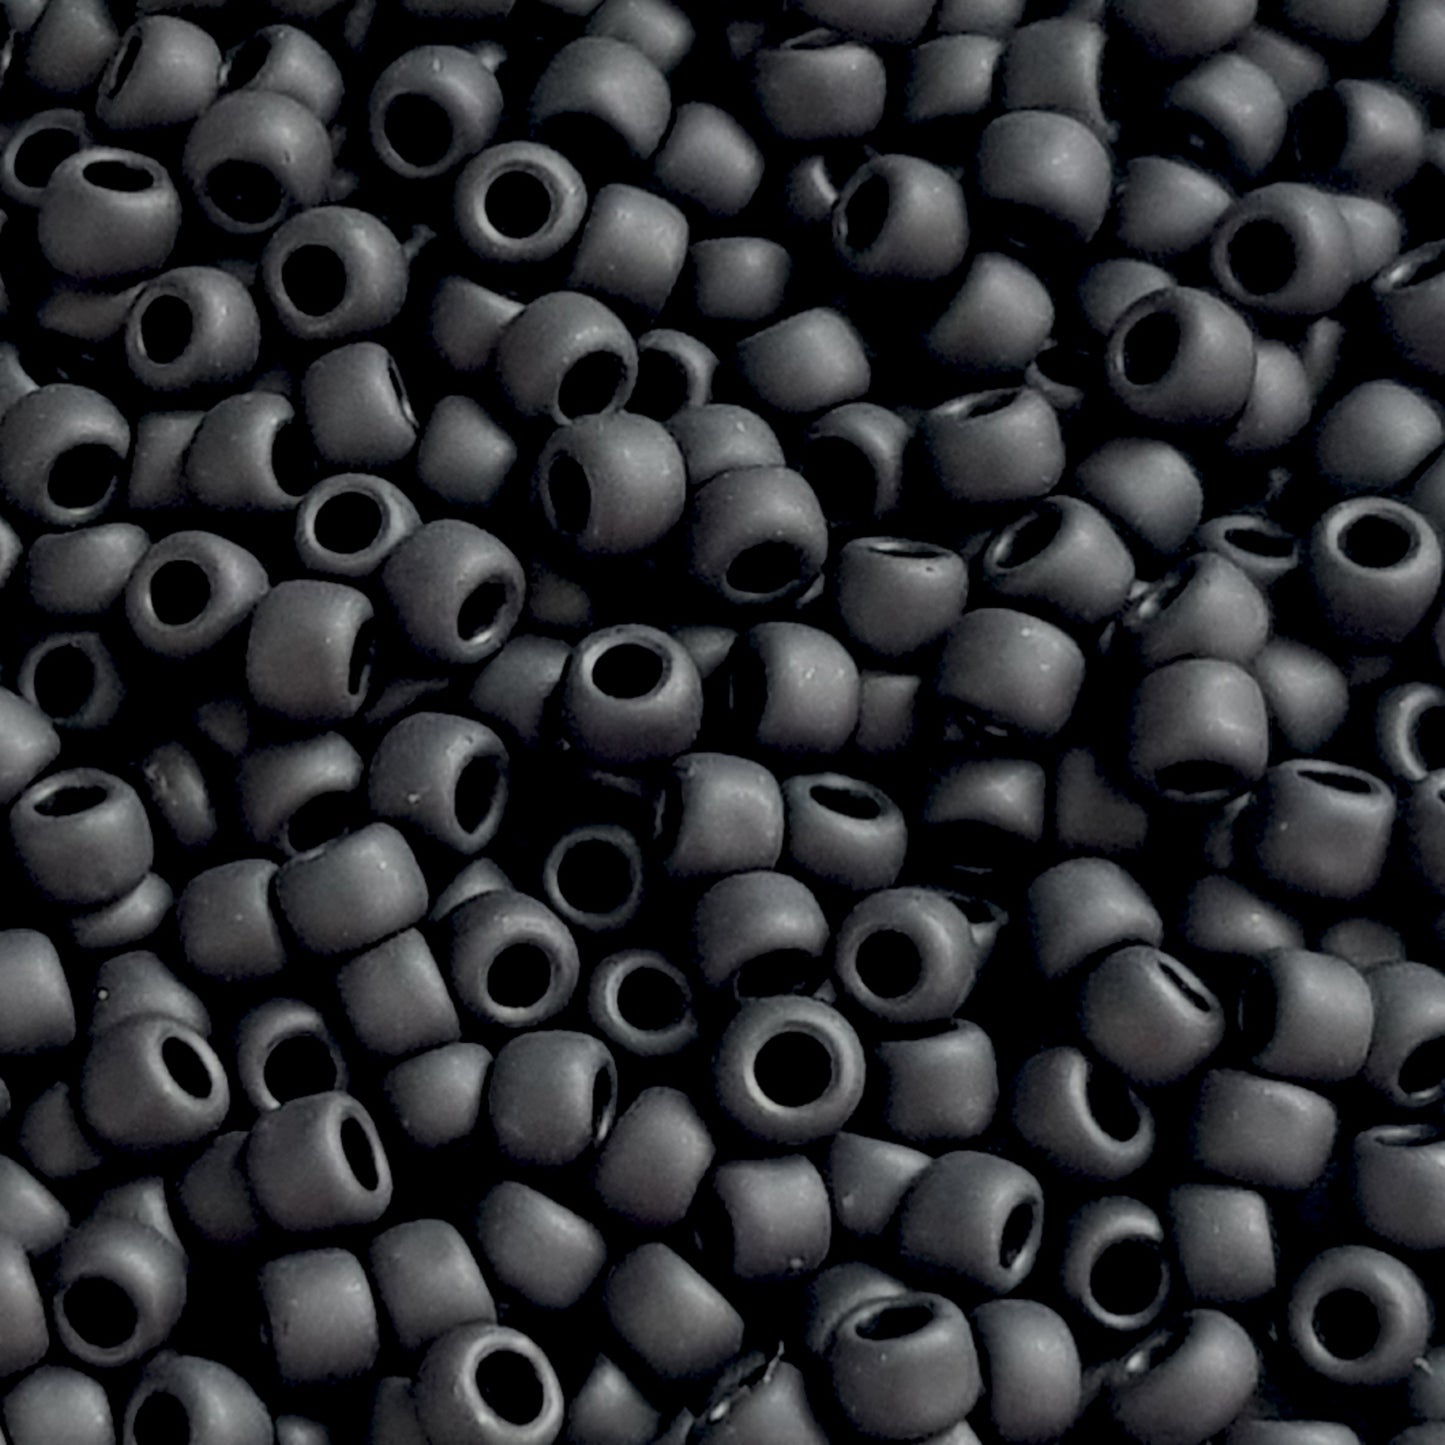 8/0 TR-49F Jet Black Opaque Frosted 10g/30g Round Toho Seed Bead - Beading Supply